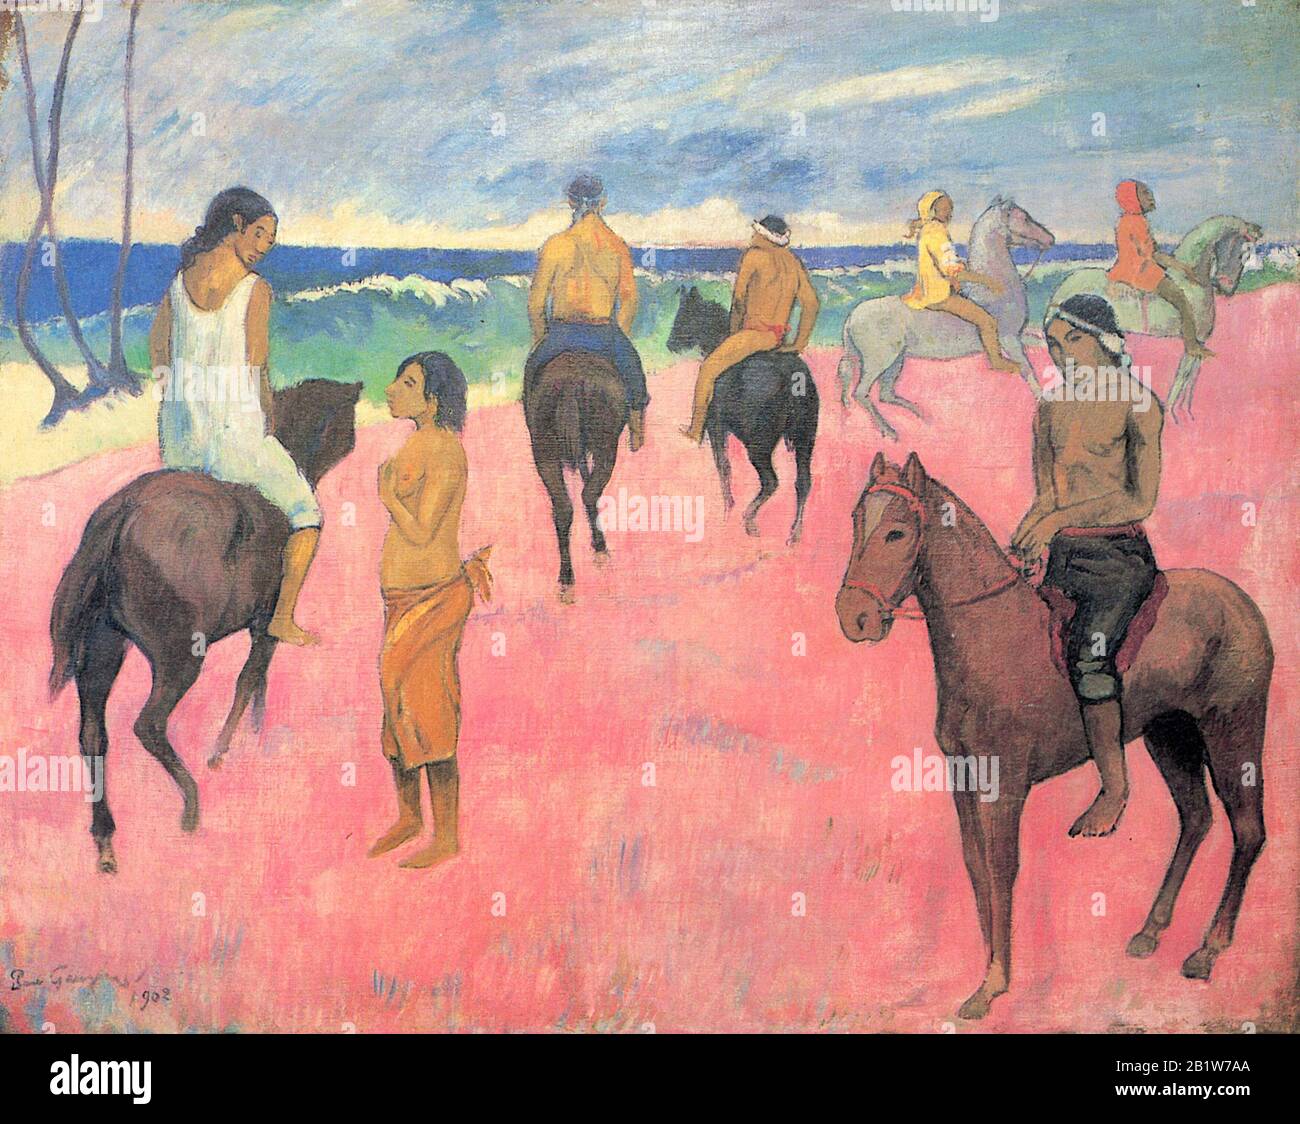 Horsemen on the Beach II (Cavaliers sur la plage II) (1902) Early 20th Century Painting by Paul Gauguin - Very high resolution and quality image Stock Photo